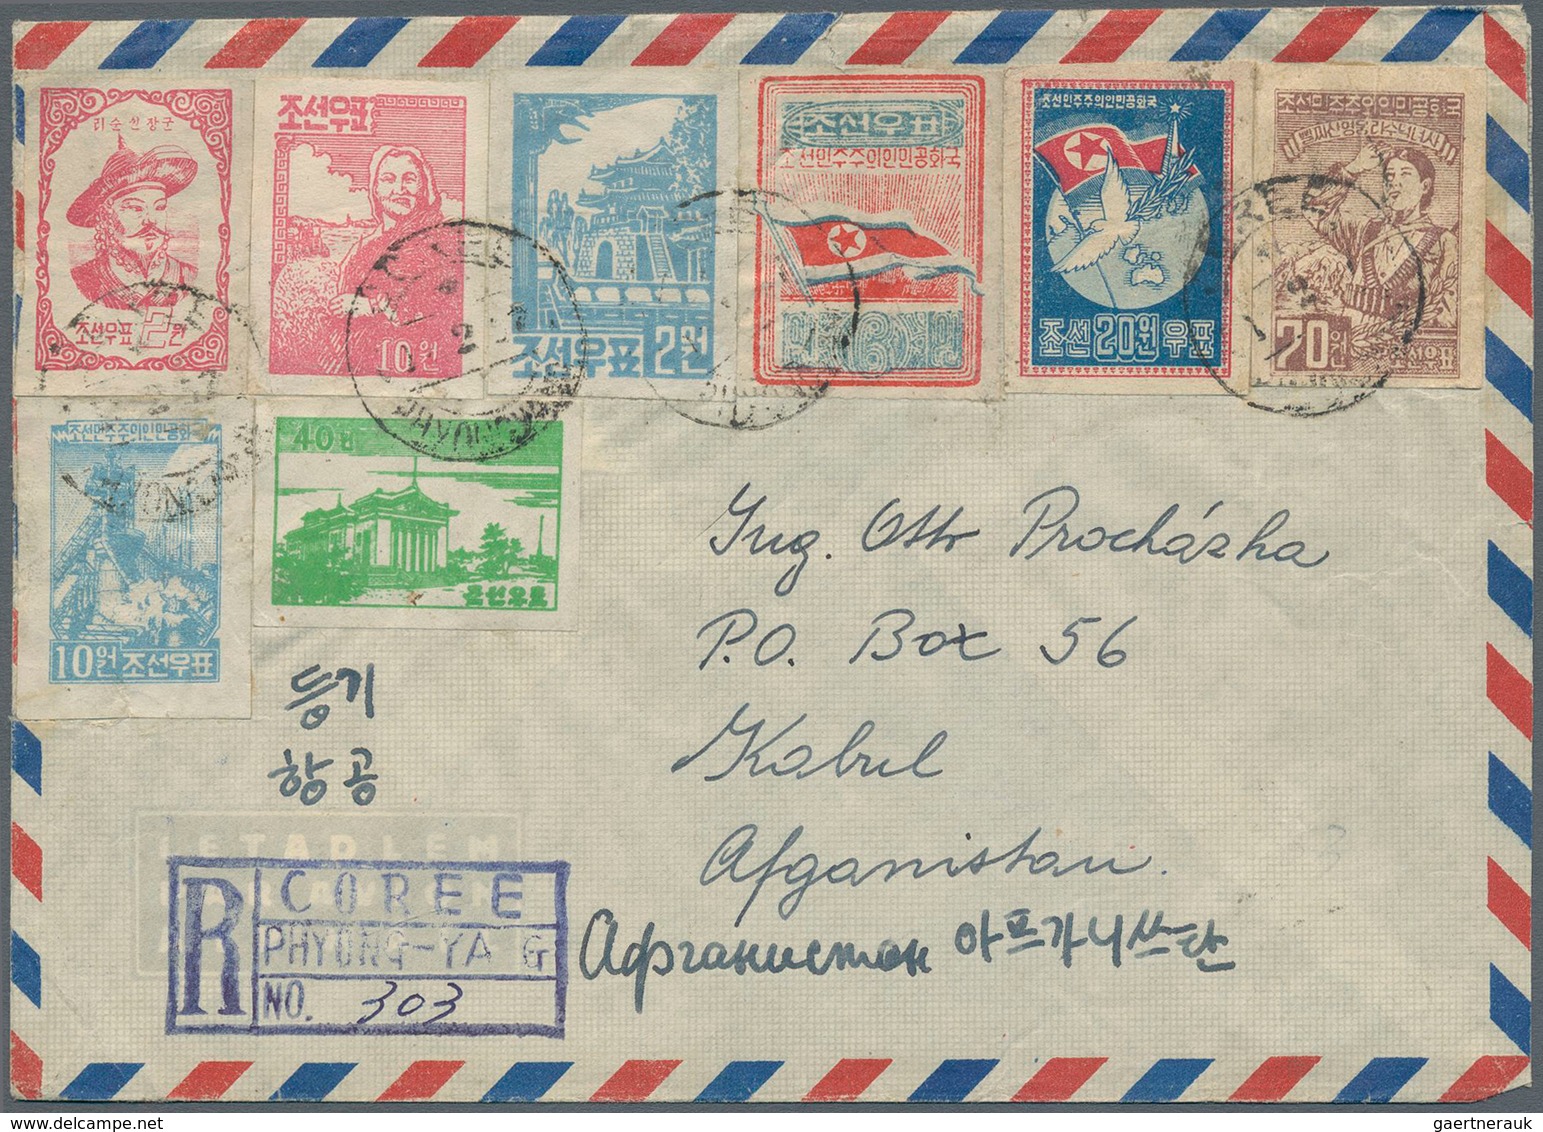 23357 Korea-Nord: 1950/59, covers/used ppc (11) with a variety of frankings, all overseas and mostly to Cz